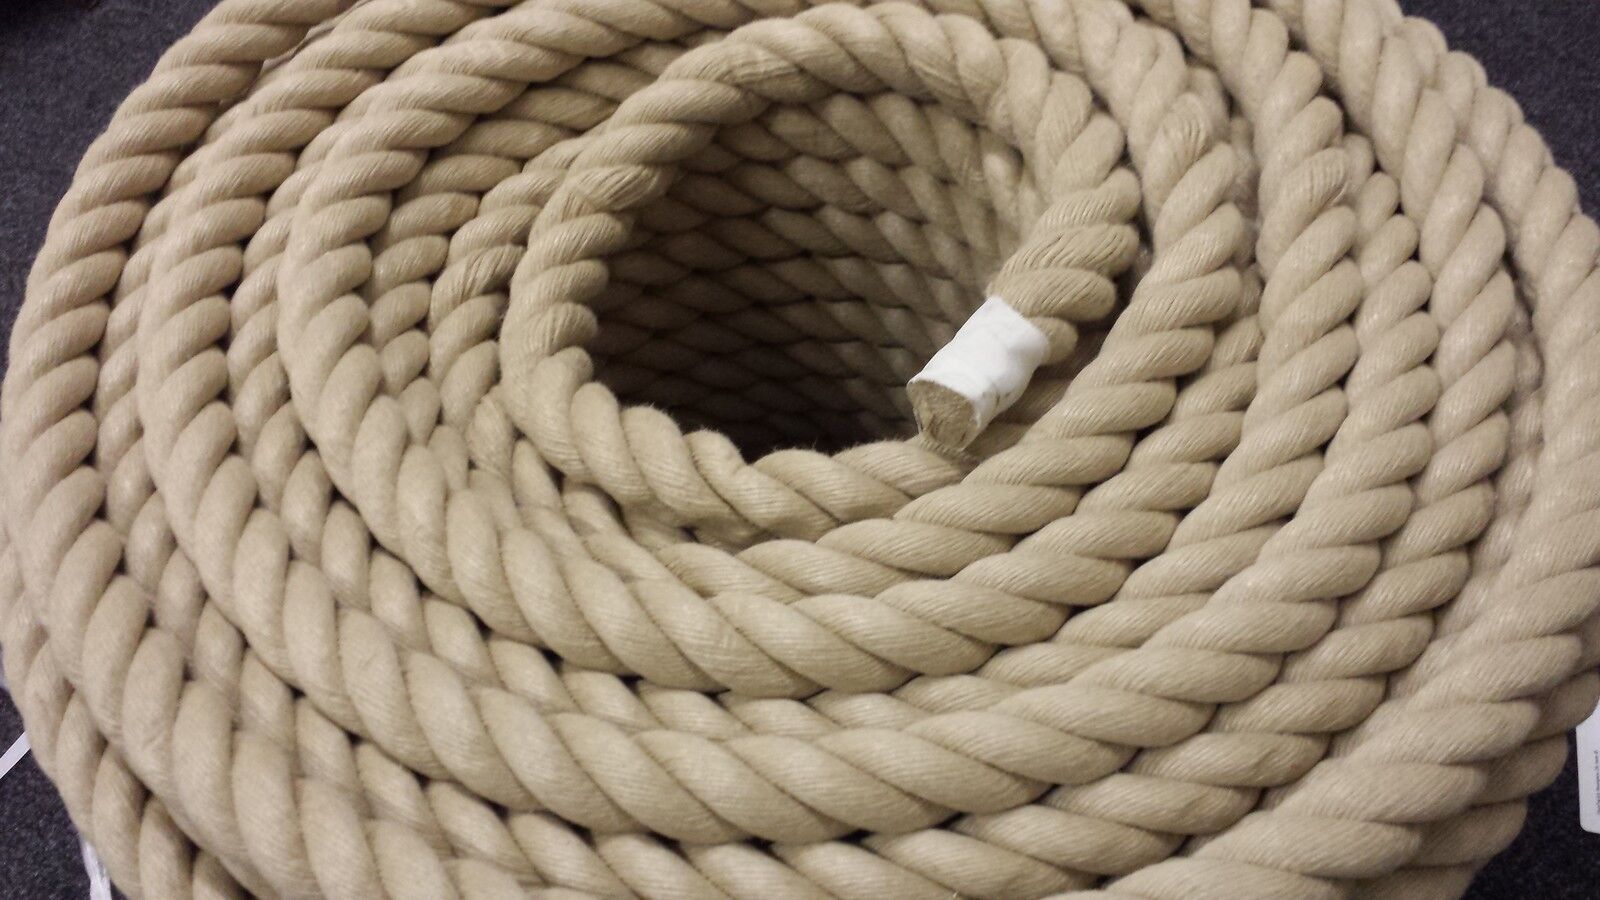 36mm Synthetic Hemp Rope - Choose your length - Use for BATTLING